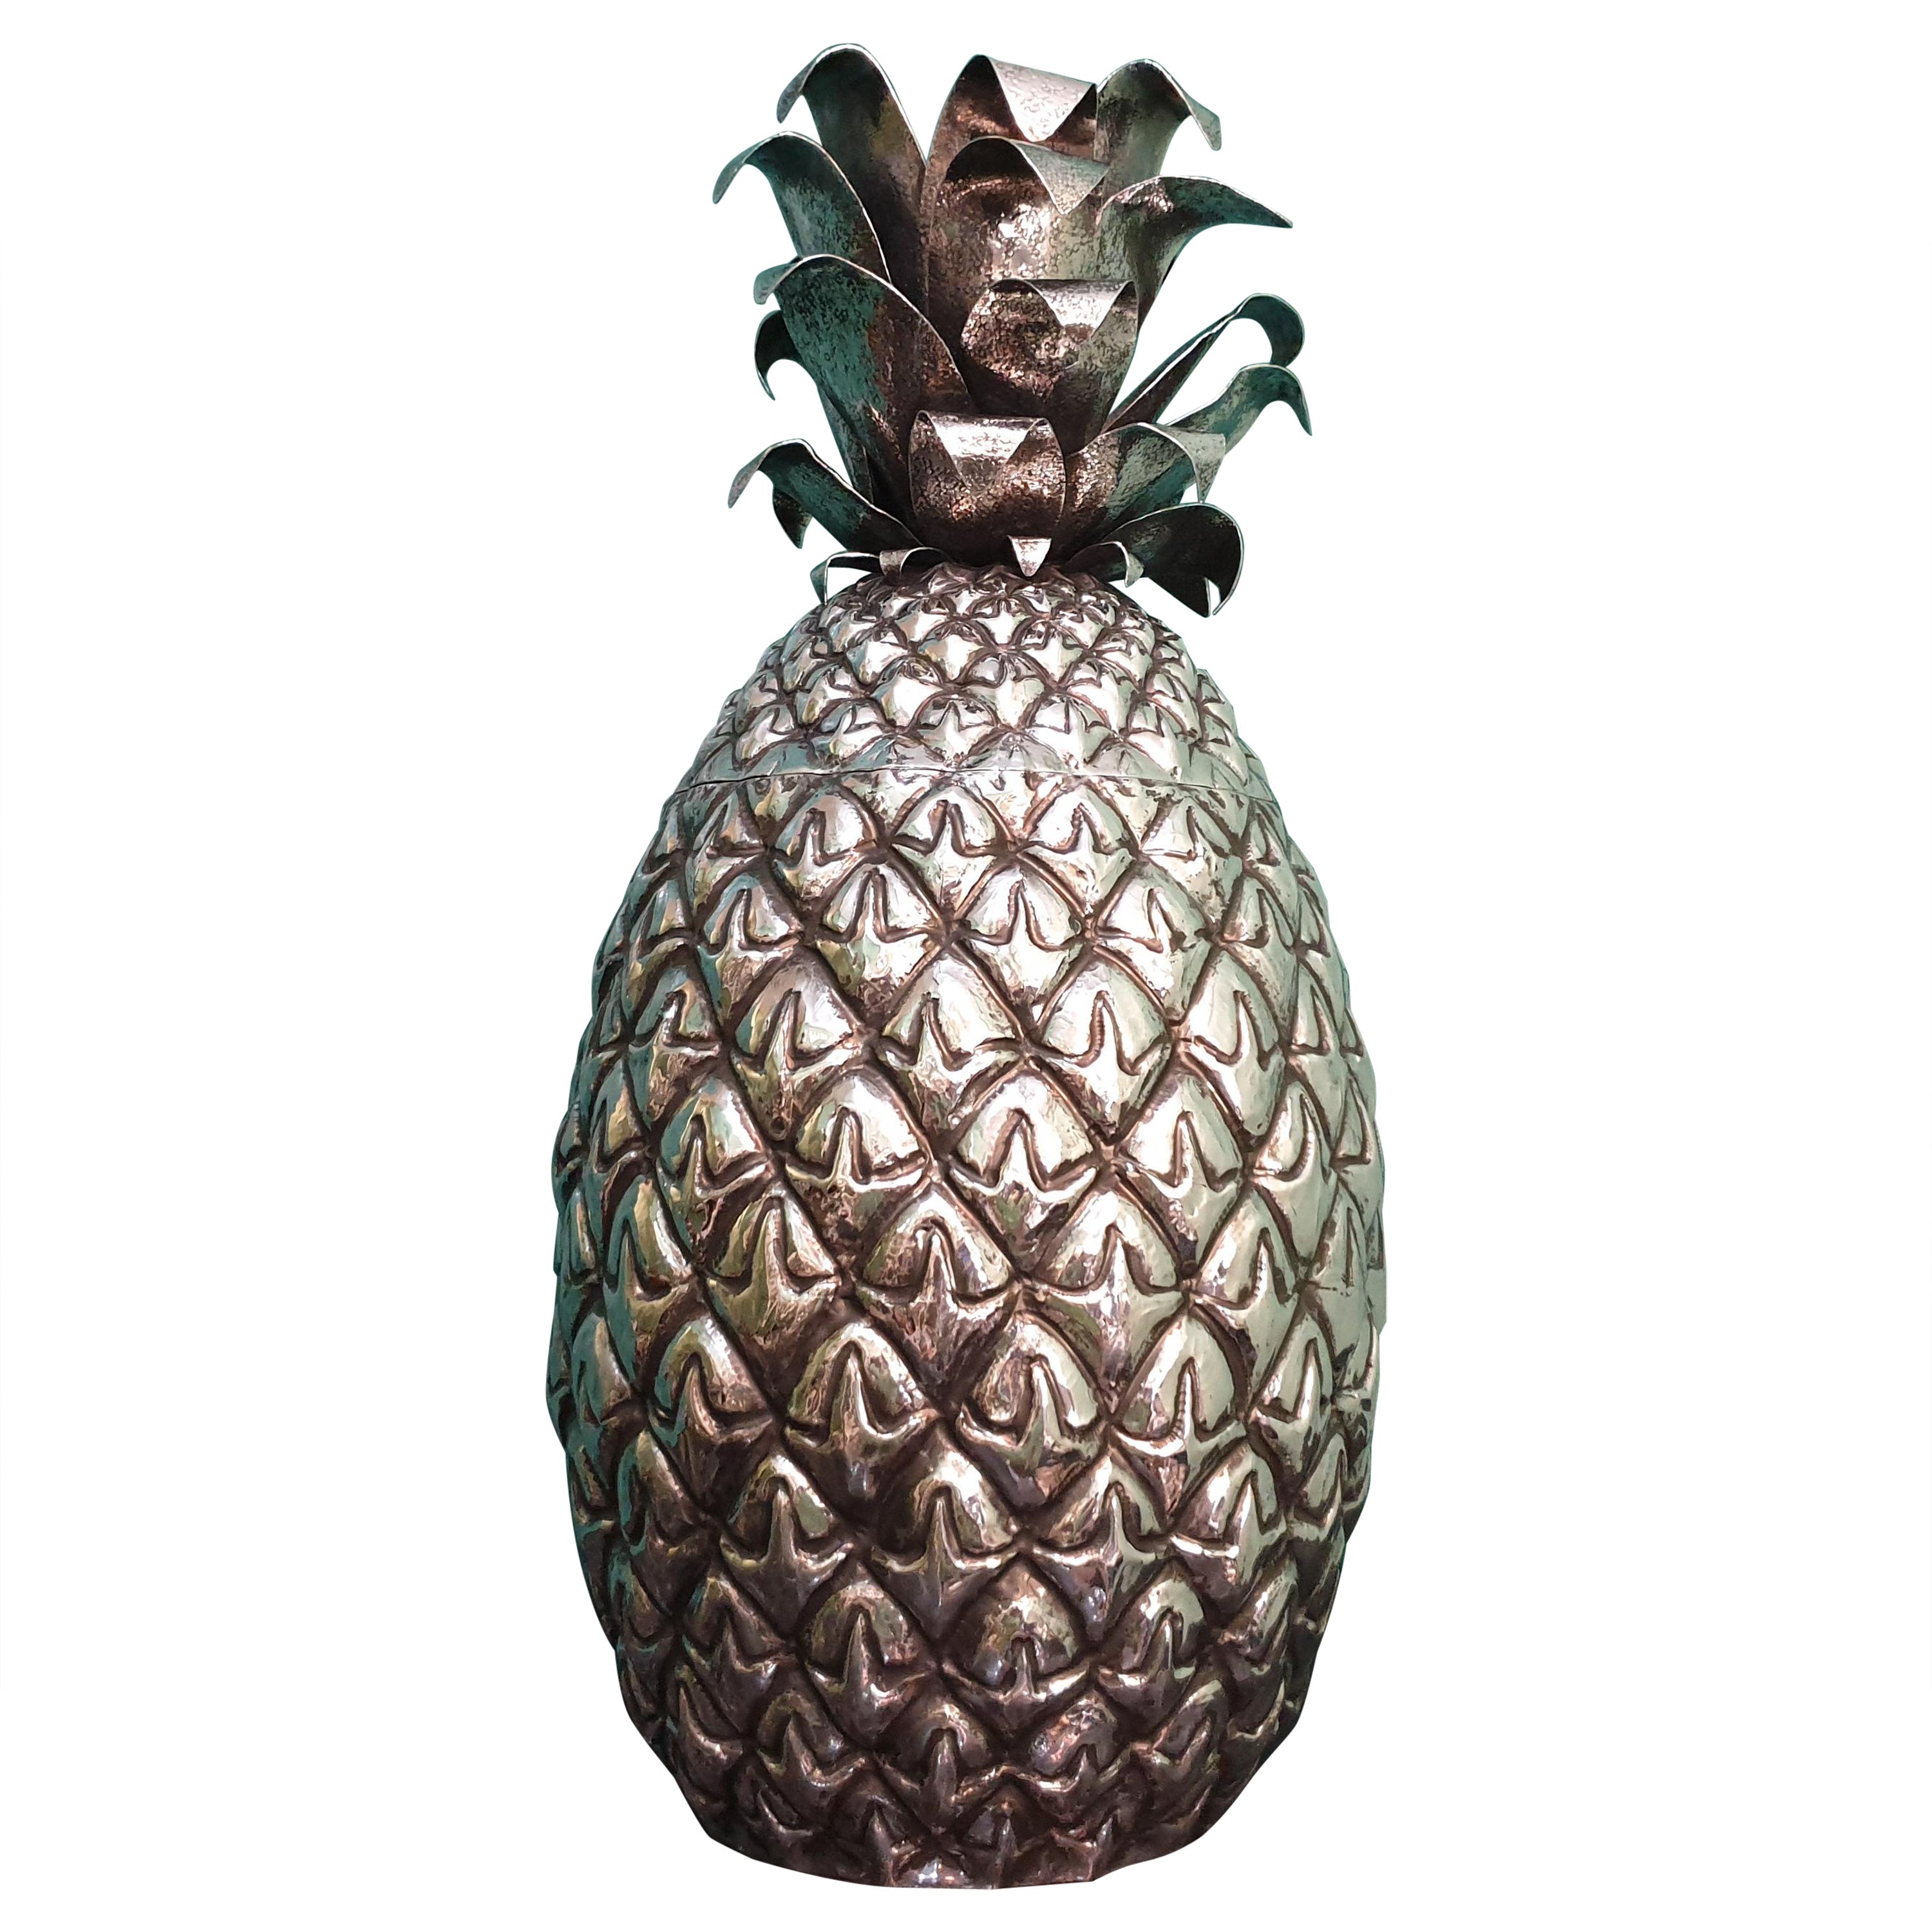 Art Deco 20th Century Silver Pineapple Vase Engraved by Hand Milan Italy, 1934-1944 For Sale